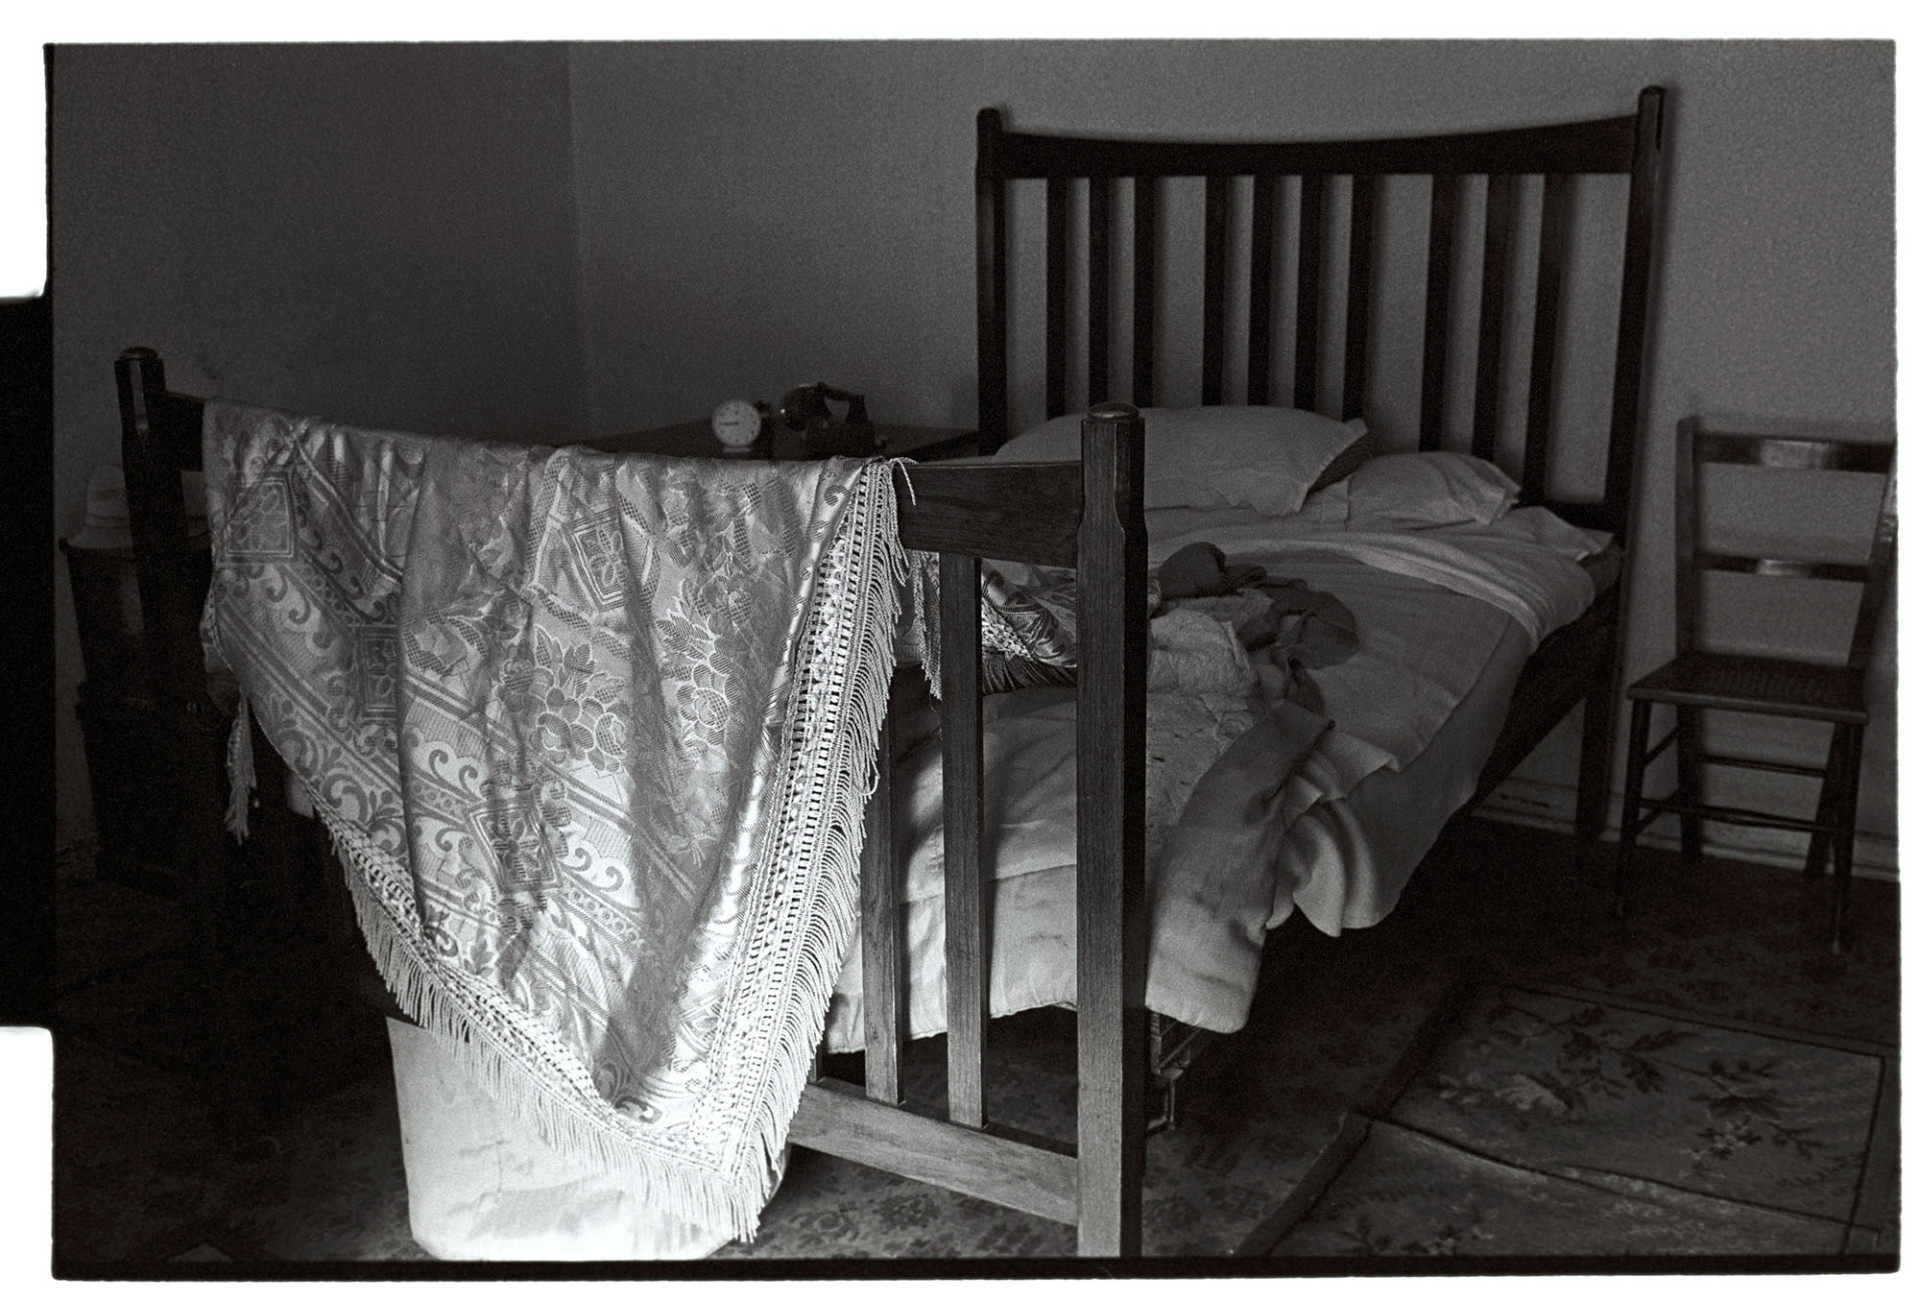 Bedroom interior, unmade bed and counterpane.
[An unmade bed with a counterpane or bedspread hanging over the wooden bedstead in Archie Parkhouse's bedroom at Millhams, Dolton.]